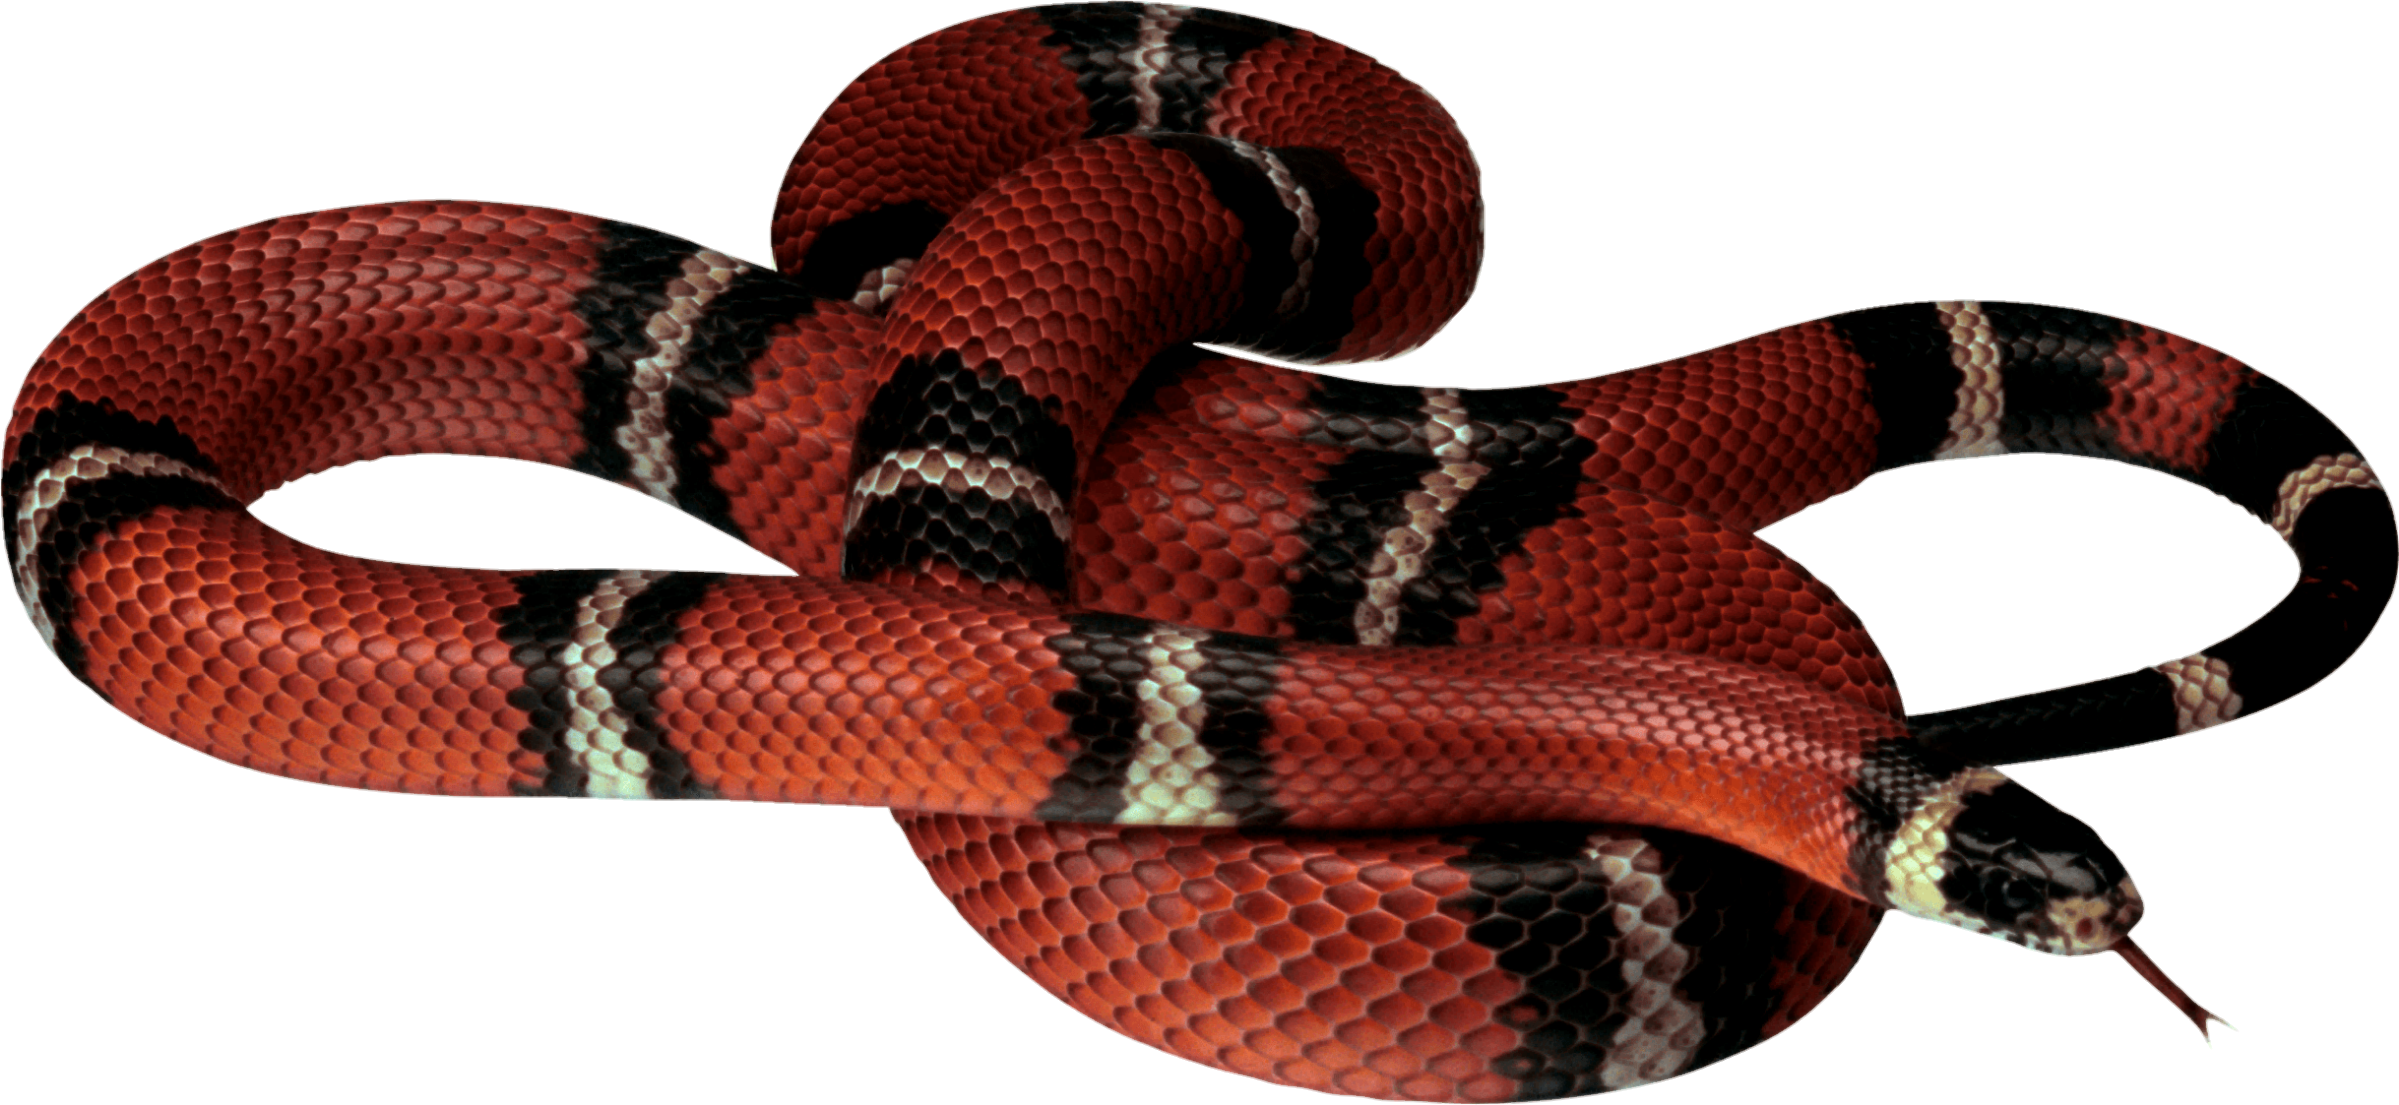 snake-png-image-pngfre-10